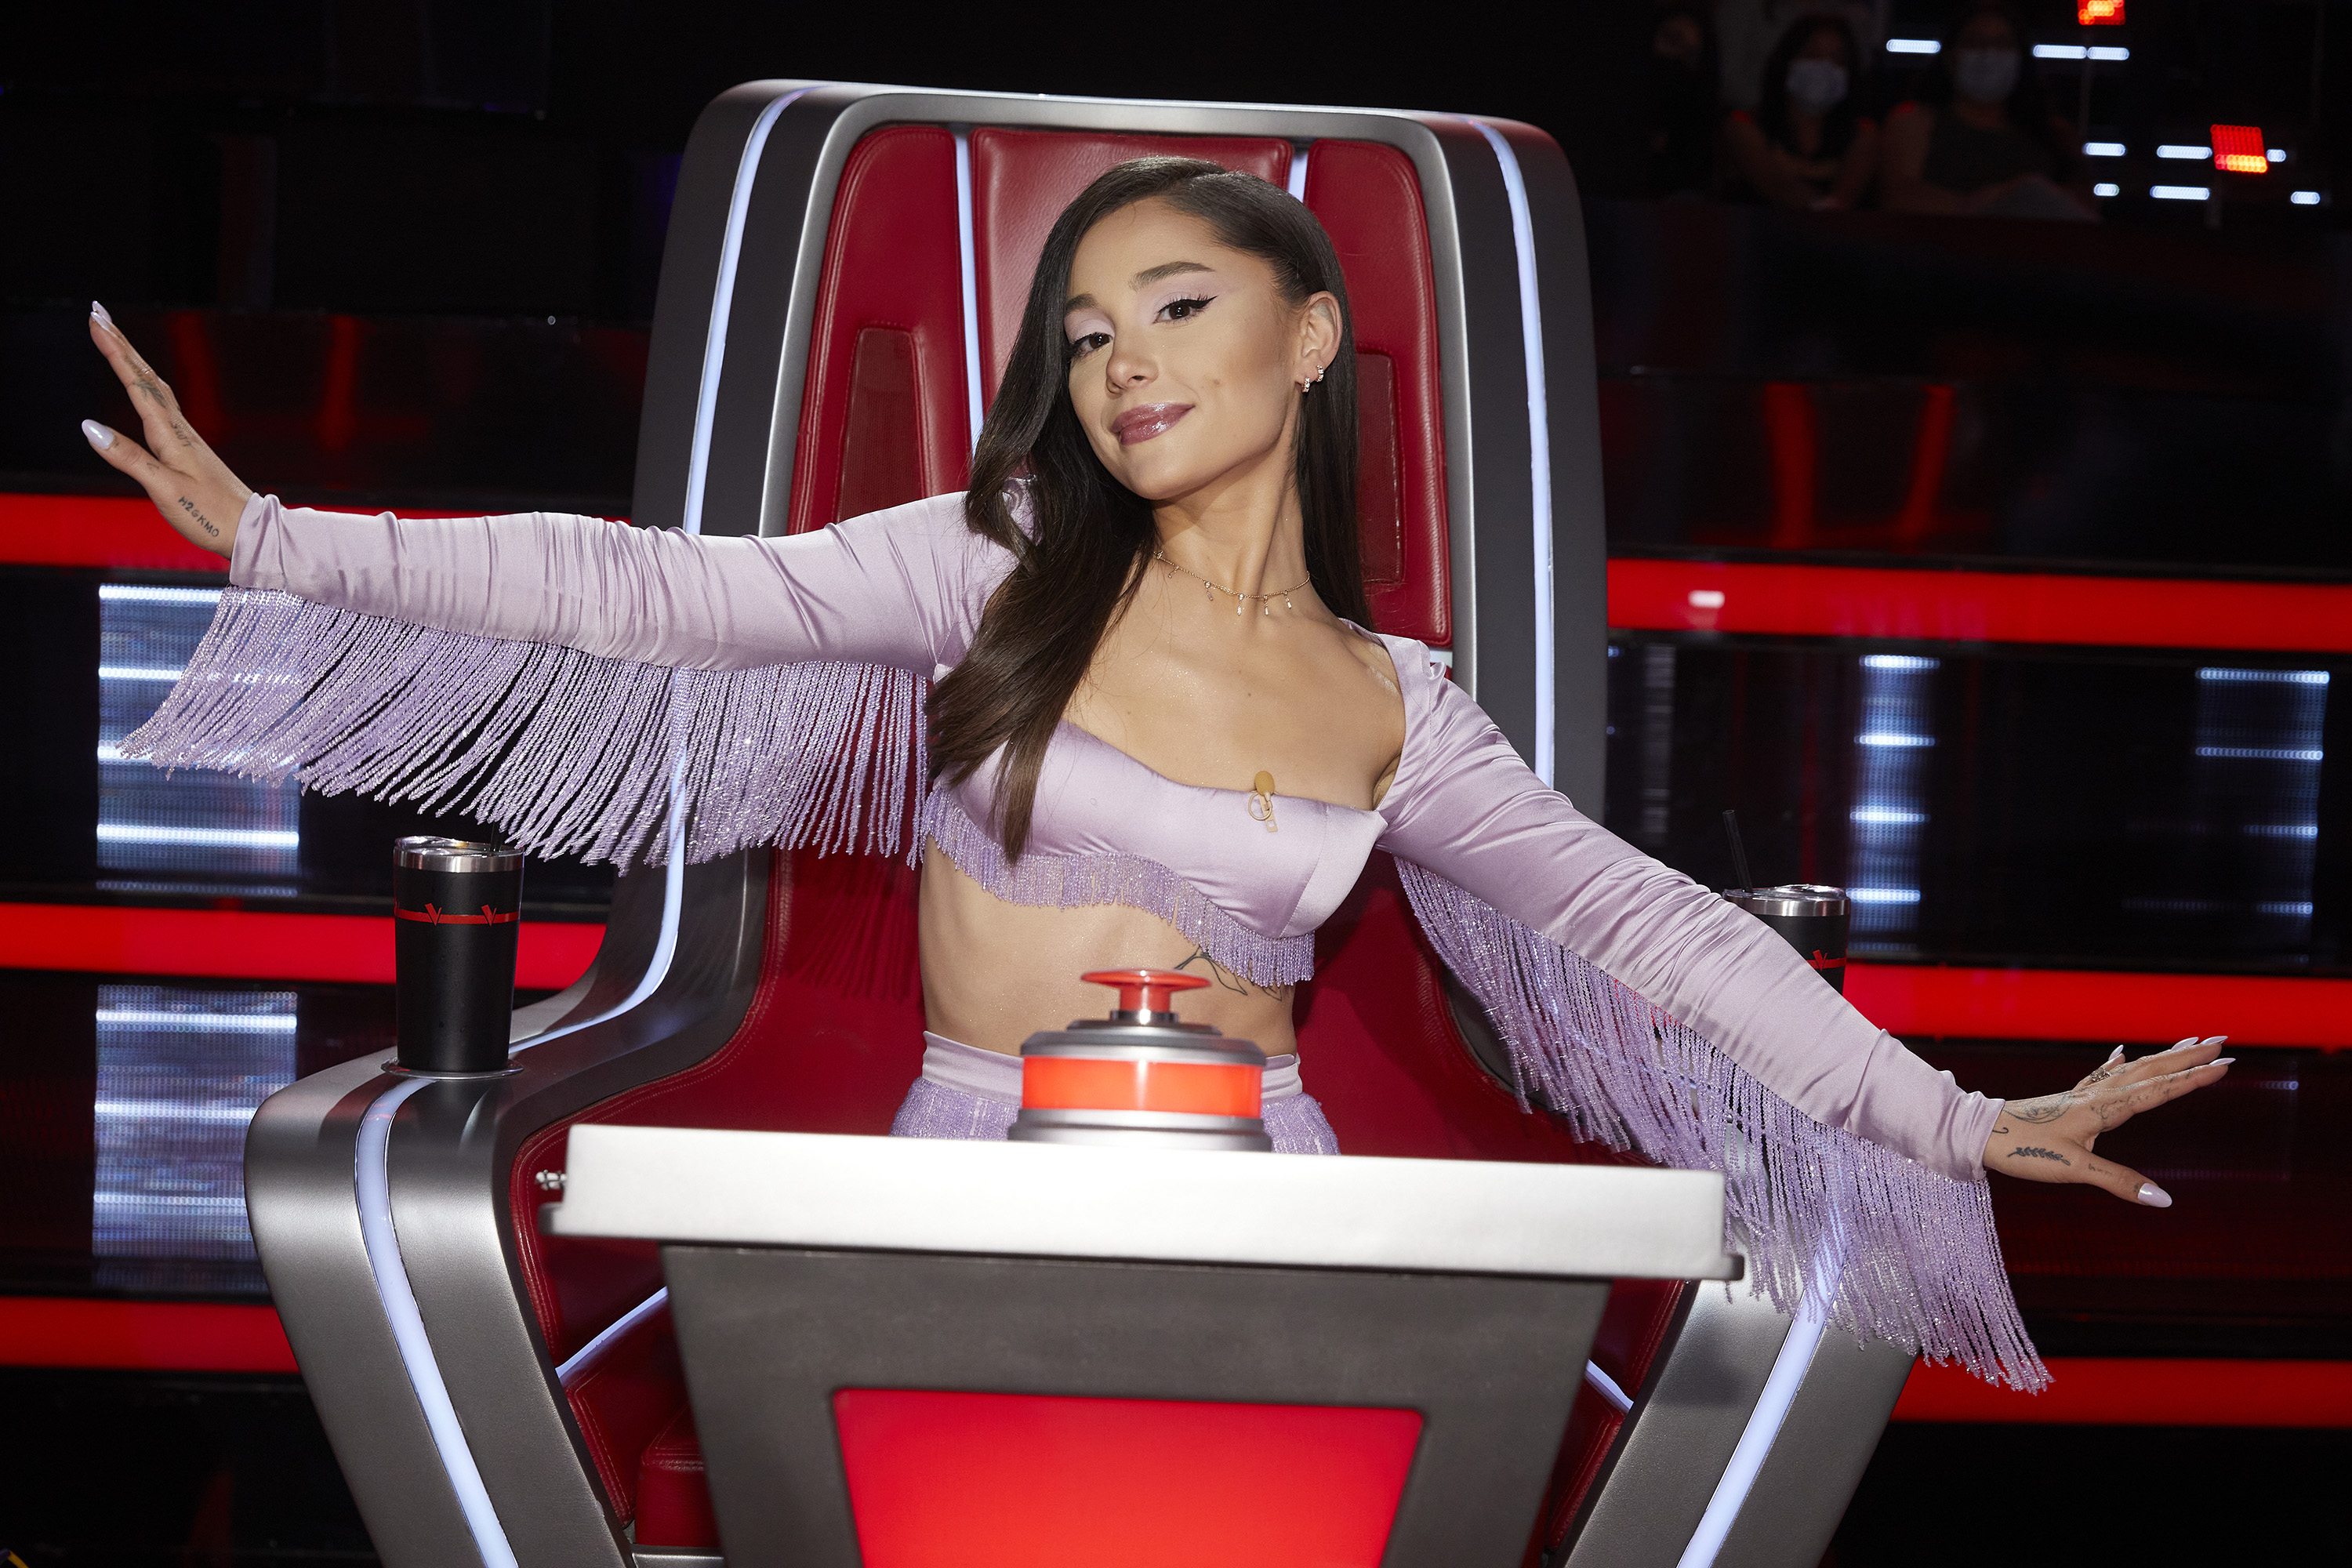 Ariana Grande on an episode of season 21 of "The Voice" in 2021 | Source: Getty Images